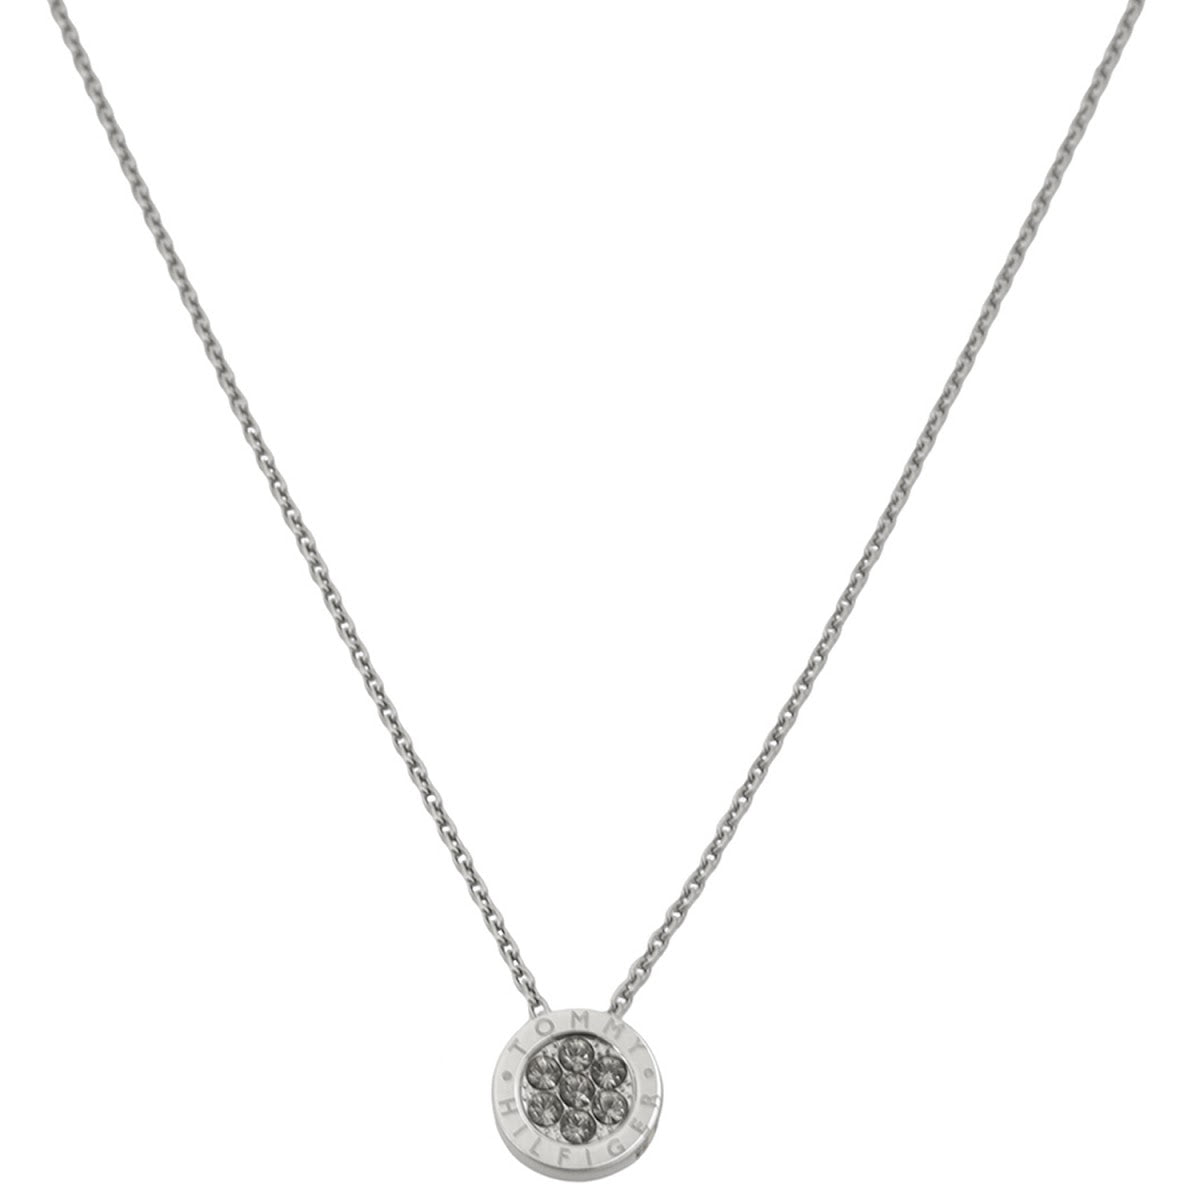 Tommy necklace 2780568 anth00053l CRYSTAL FAMI